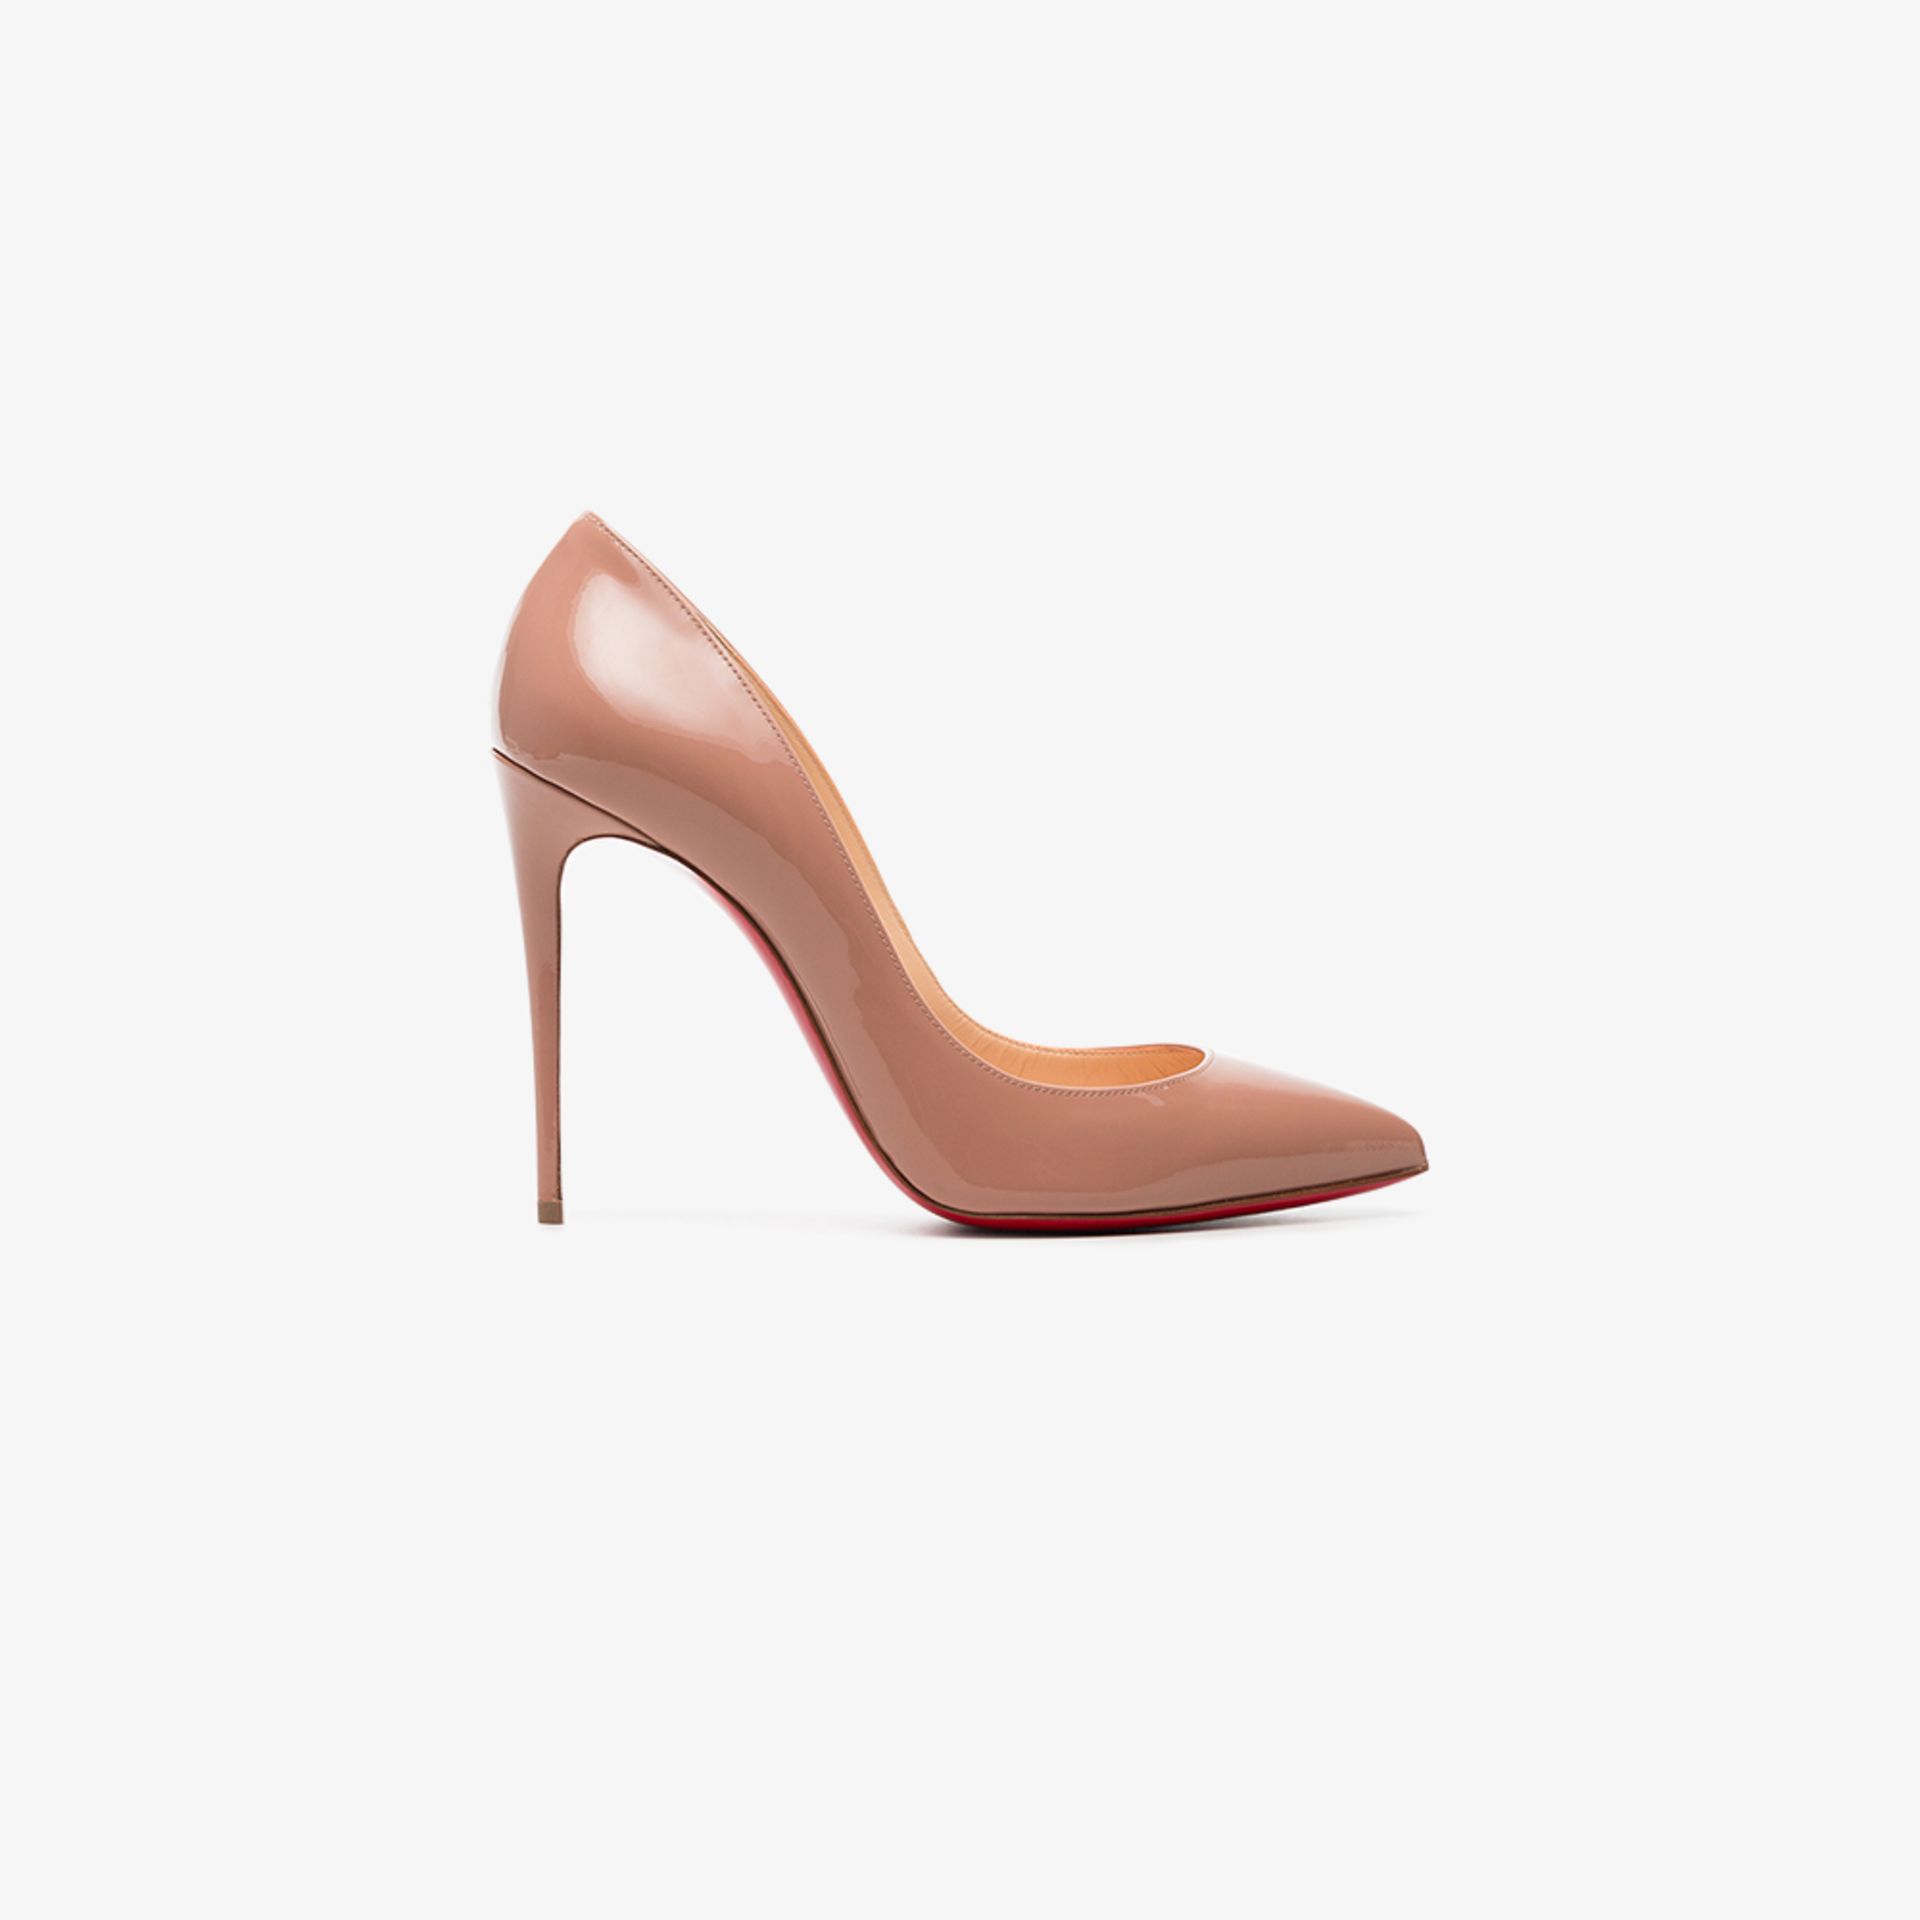 louboutin pigalle 1 nude